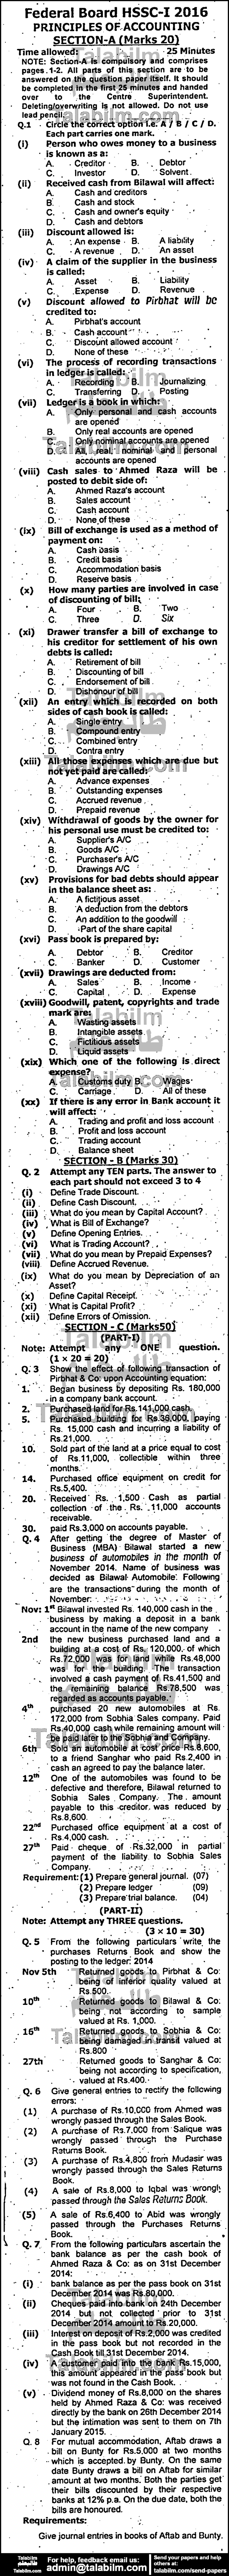 Principles Of Accounting 0 past paper for Group-I 2016